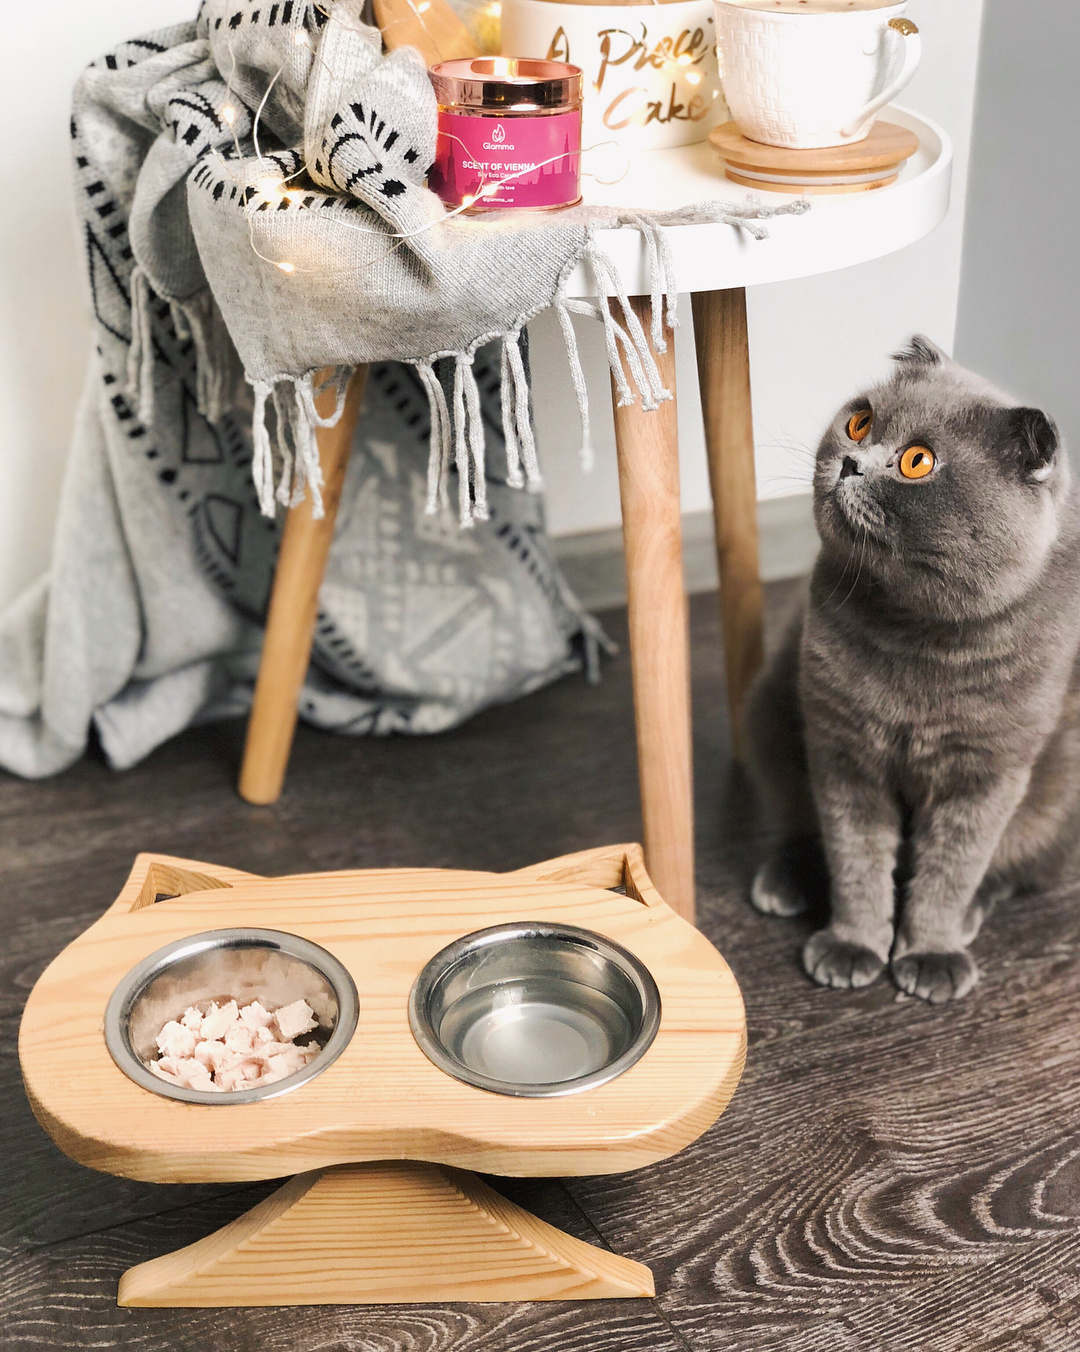 Gray cat sitting next to food bowl and wood stool. Photo by Instagram user @lia_obri